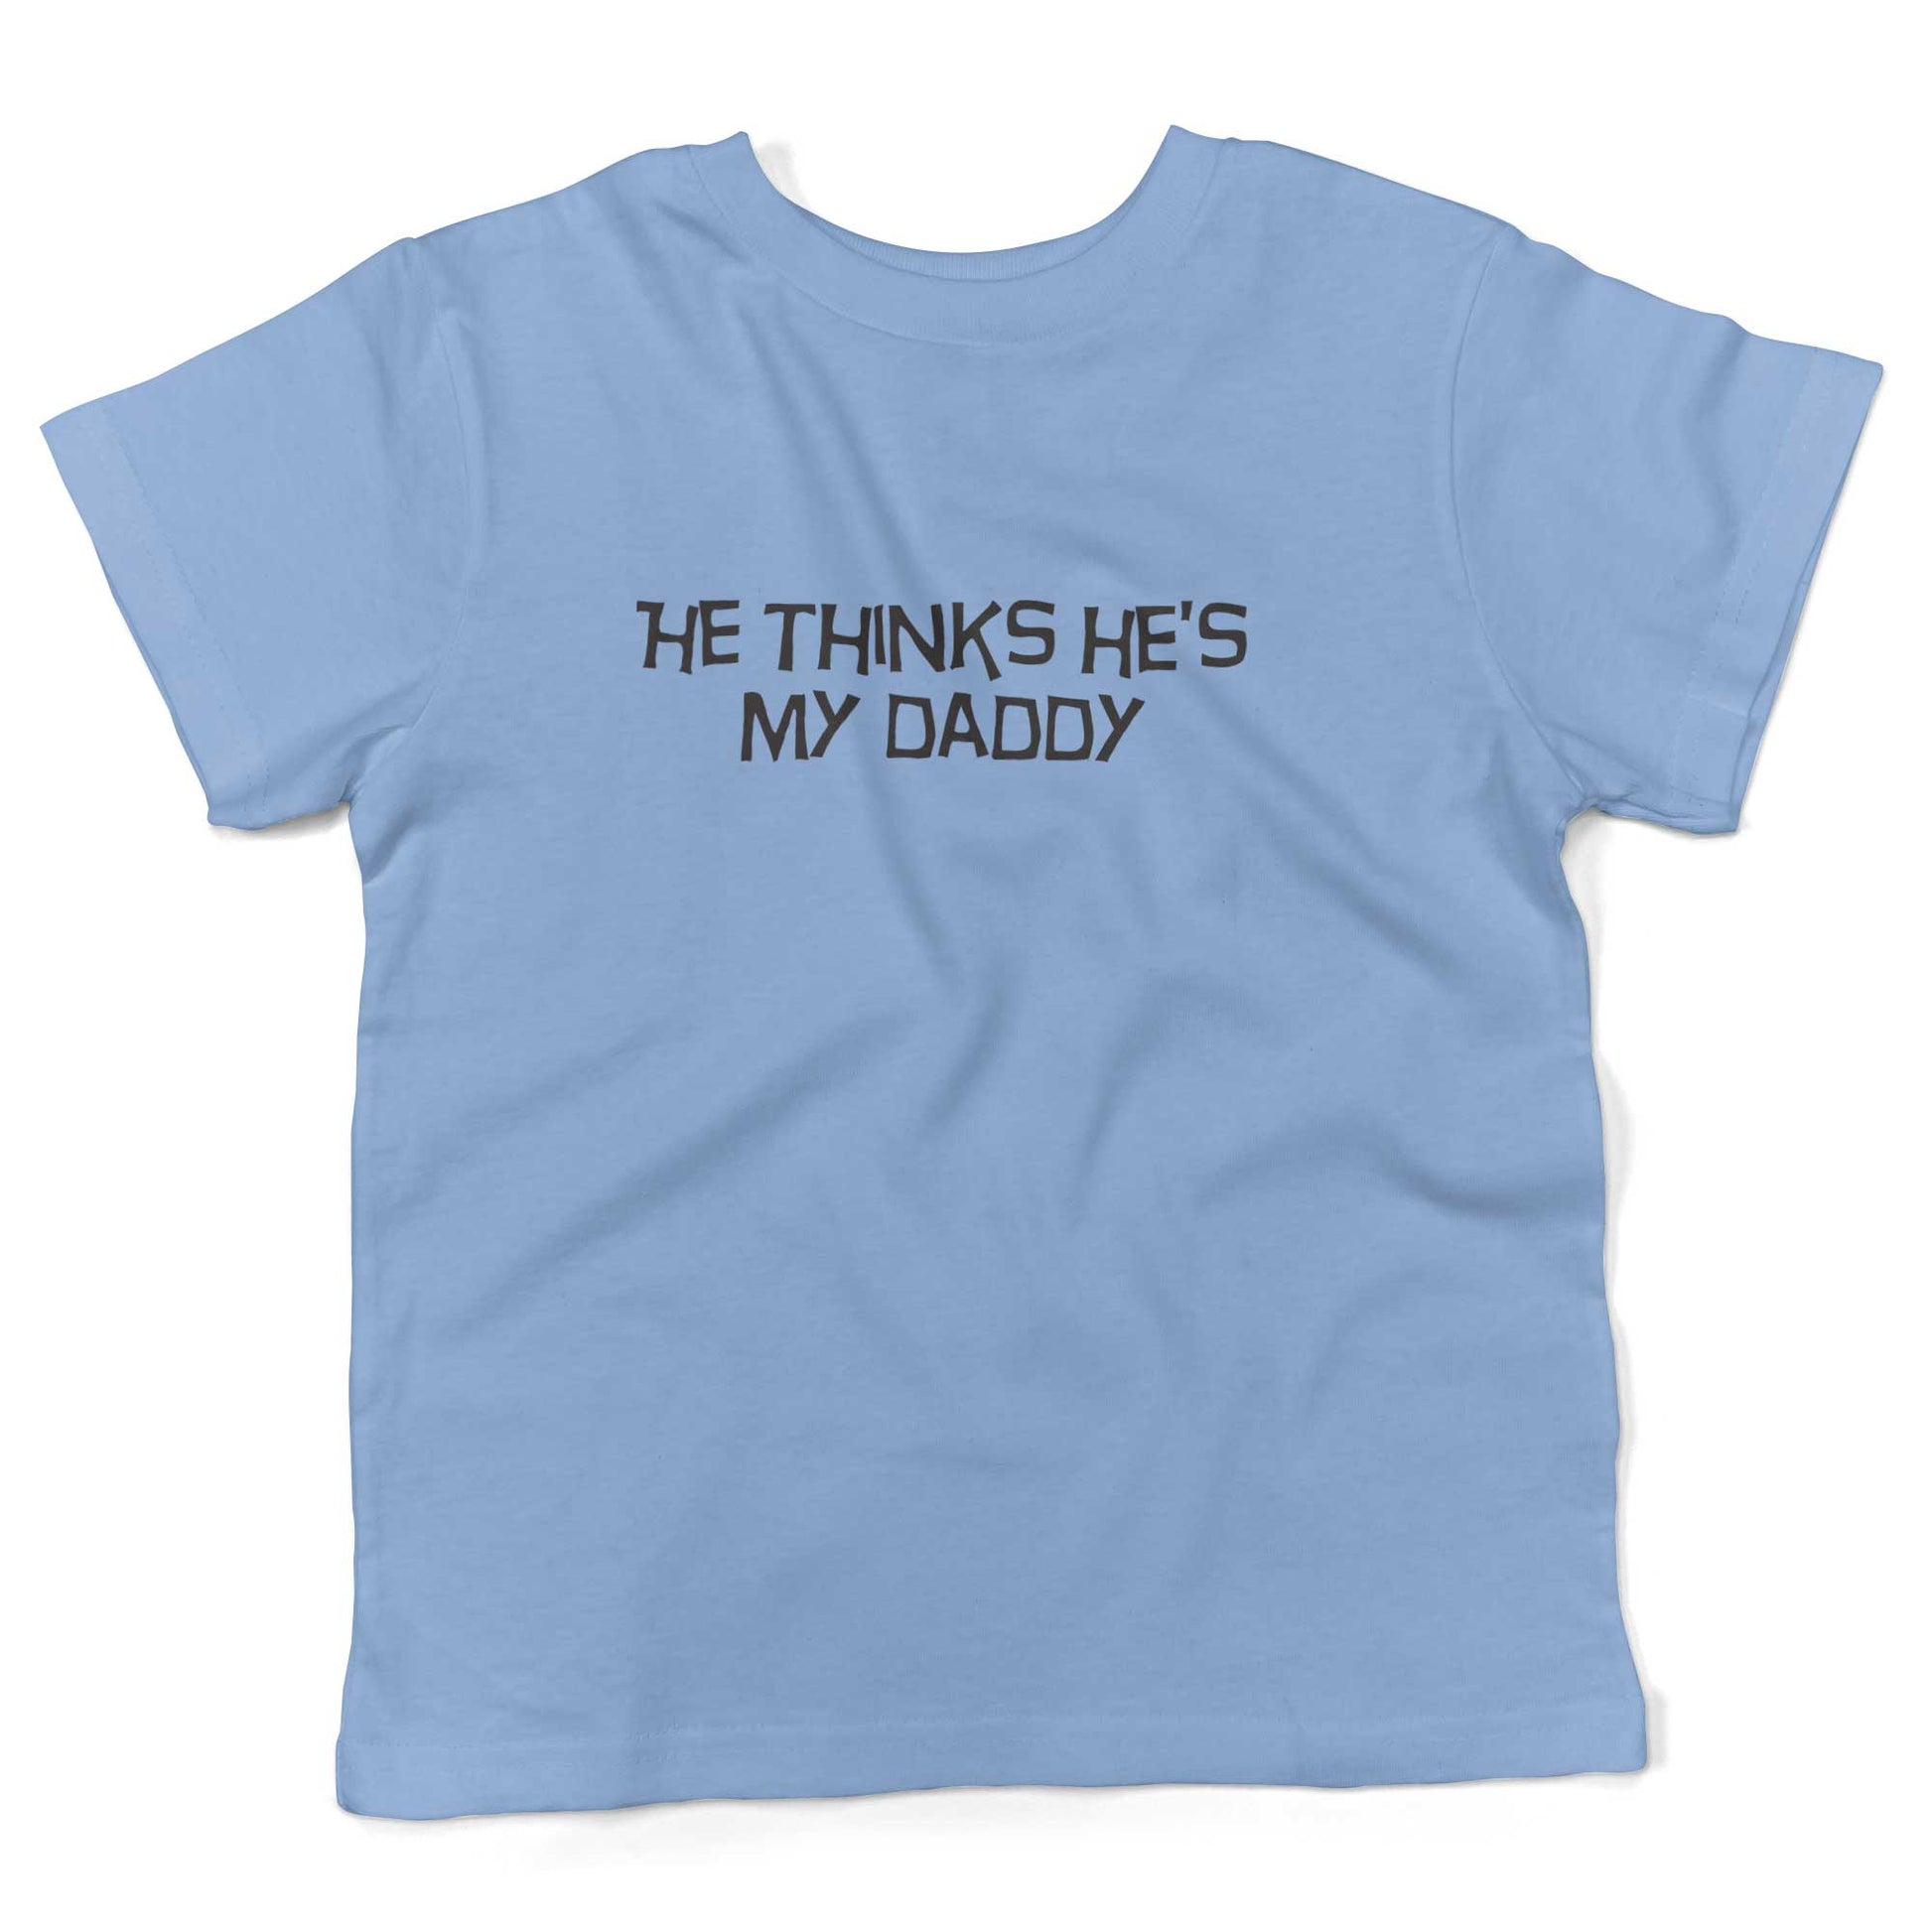 He Thinks He's My Daddy Toddler Shirt-Organic Baby Blue-2T